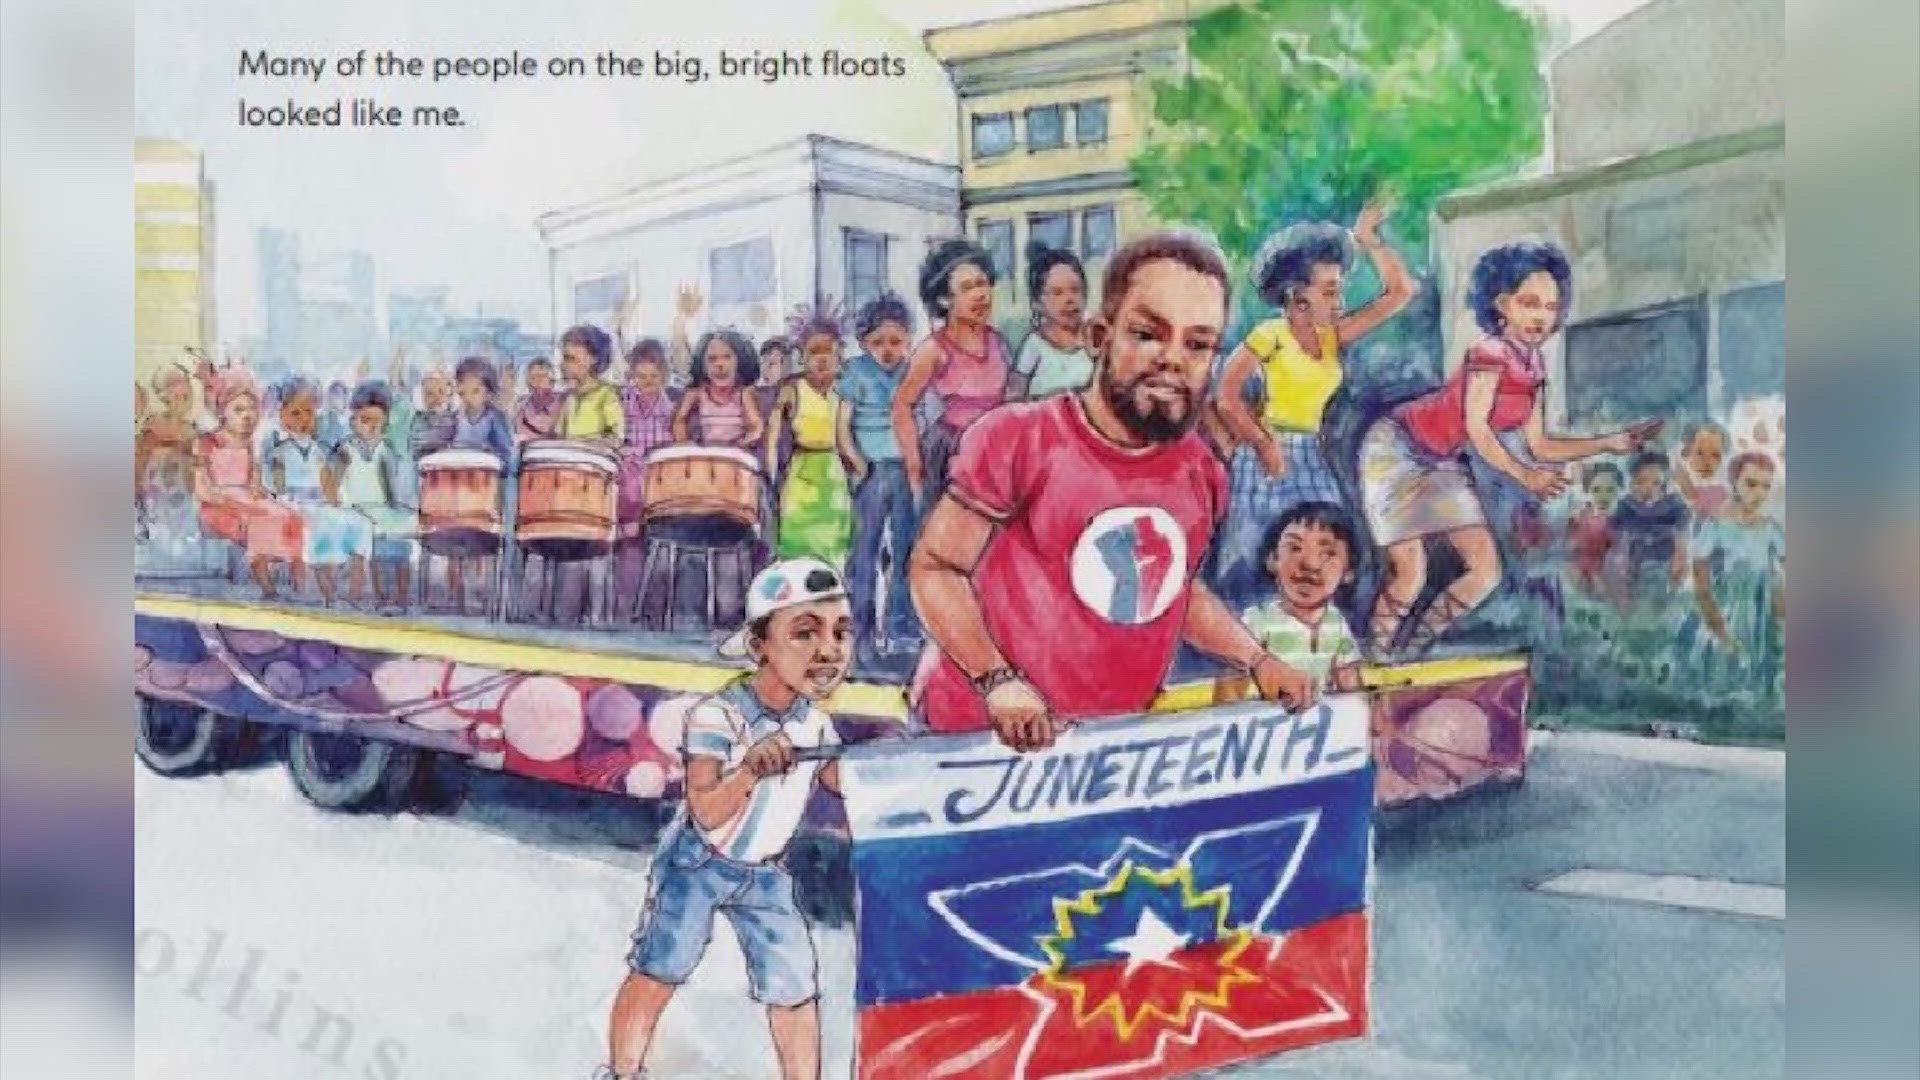 A brand new children's picture book captures the celebration of Juneteenth through the eyes of a child.